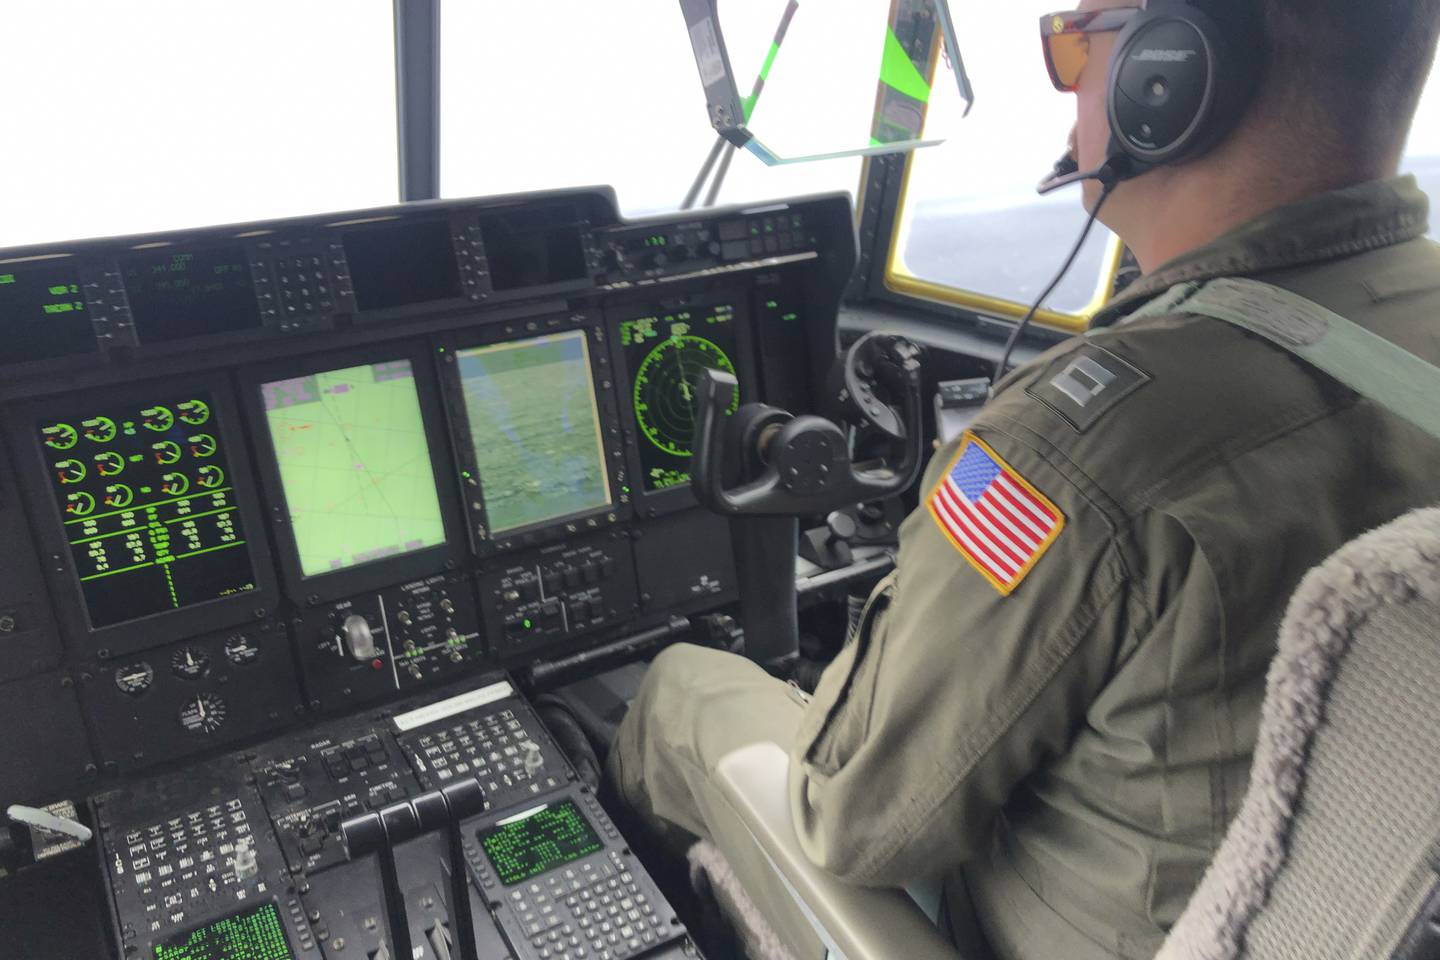 In this image provided by the U.S. Coast Guard, a crew member sits aboard a Coast Guard HC-130 Hercules airplane based at Coast Guard Air Station Elizabeth City, N.C., as it flies about 900 miles East of Cape Cod, Mass., during the search for the 21-foot submersible, Titan, Wednesday, June 21, 2023.